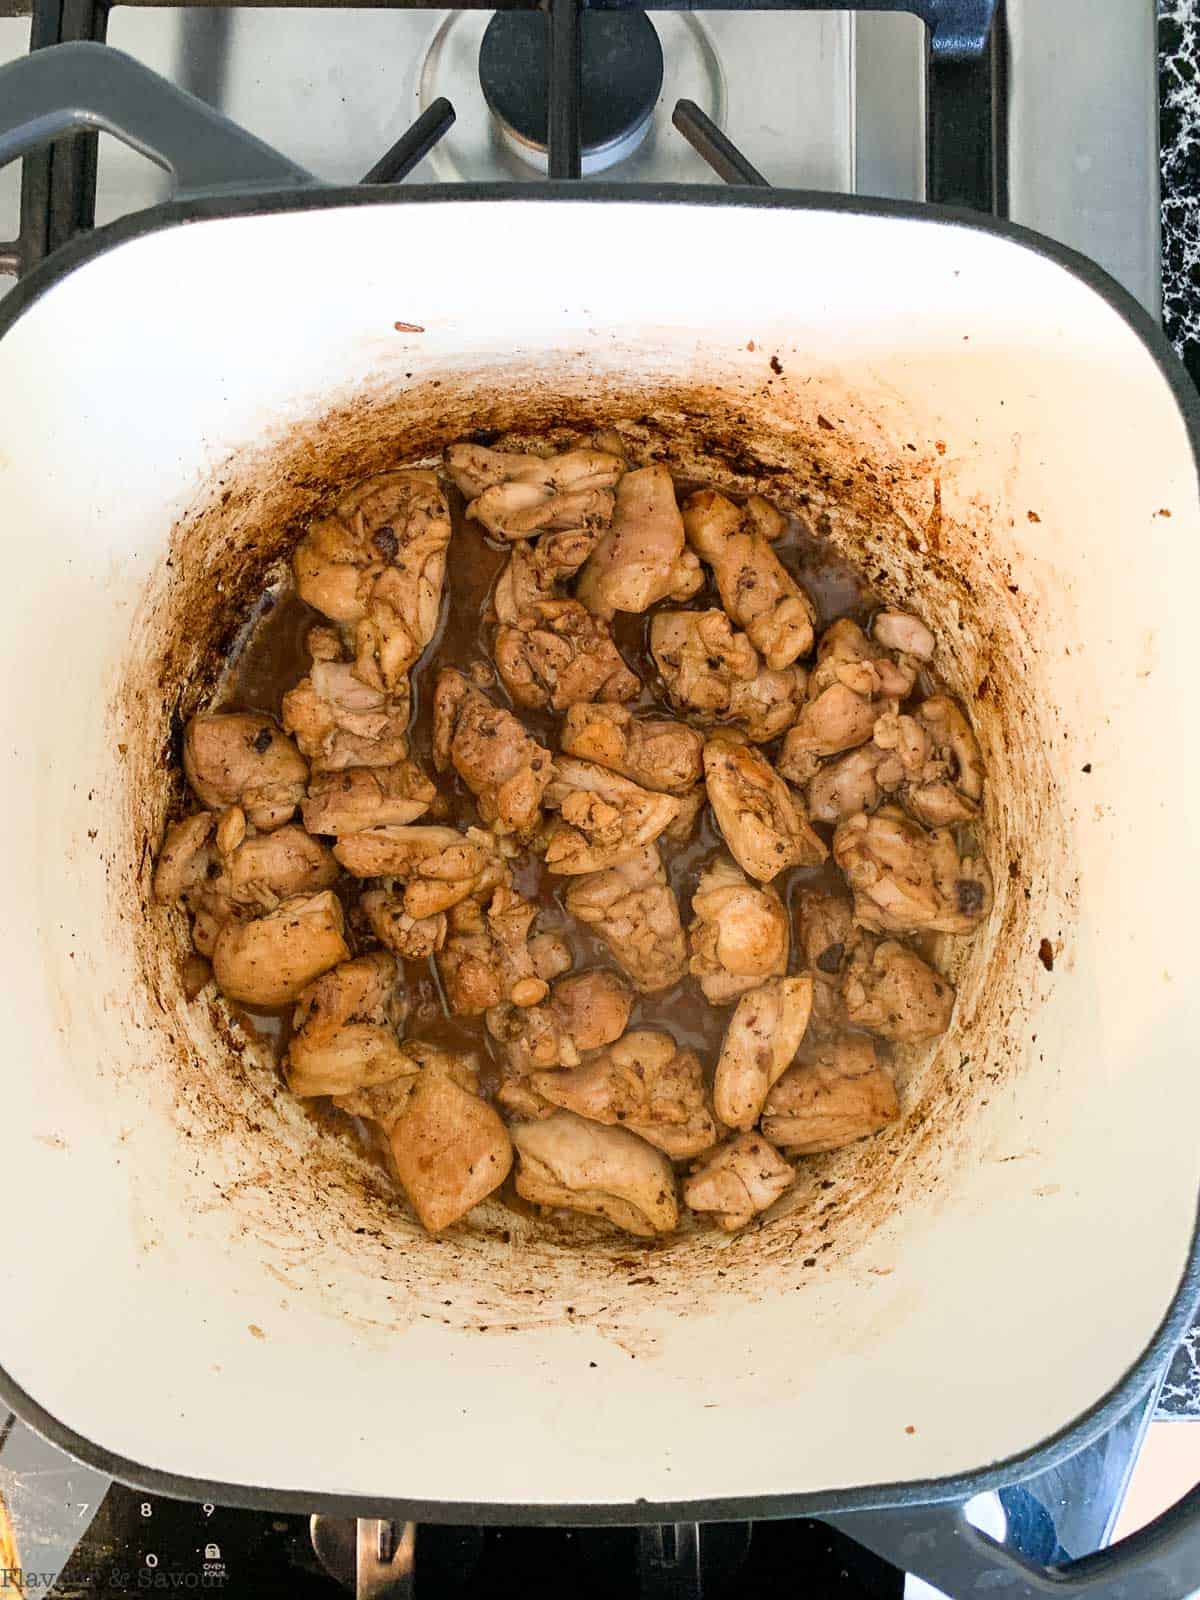 Chicken pieces browning in a Dutch oven.